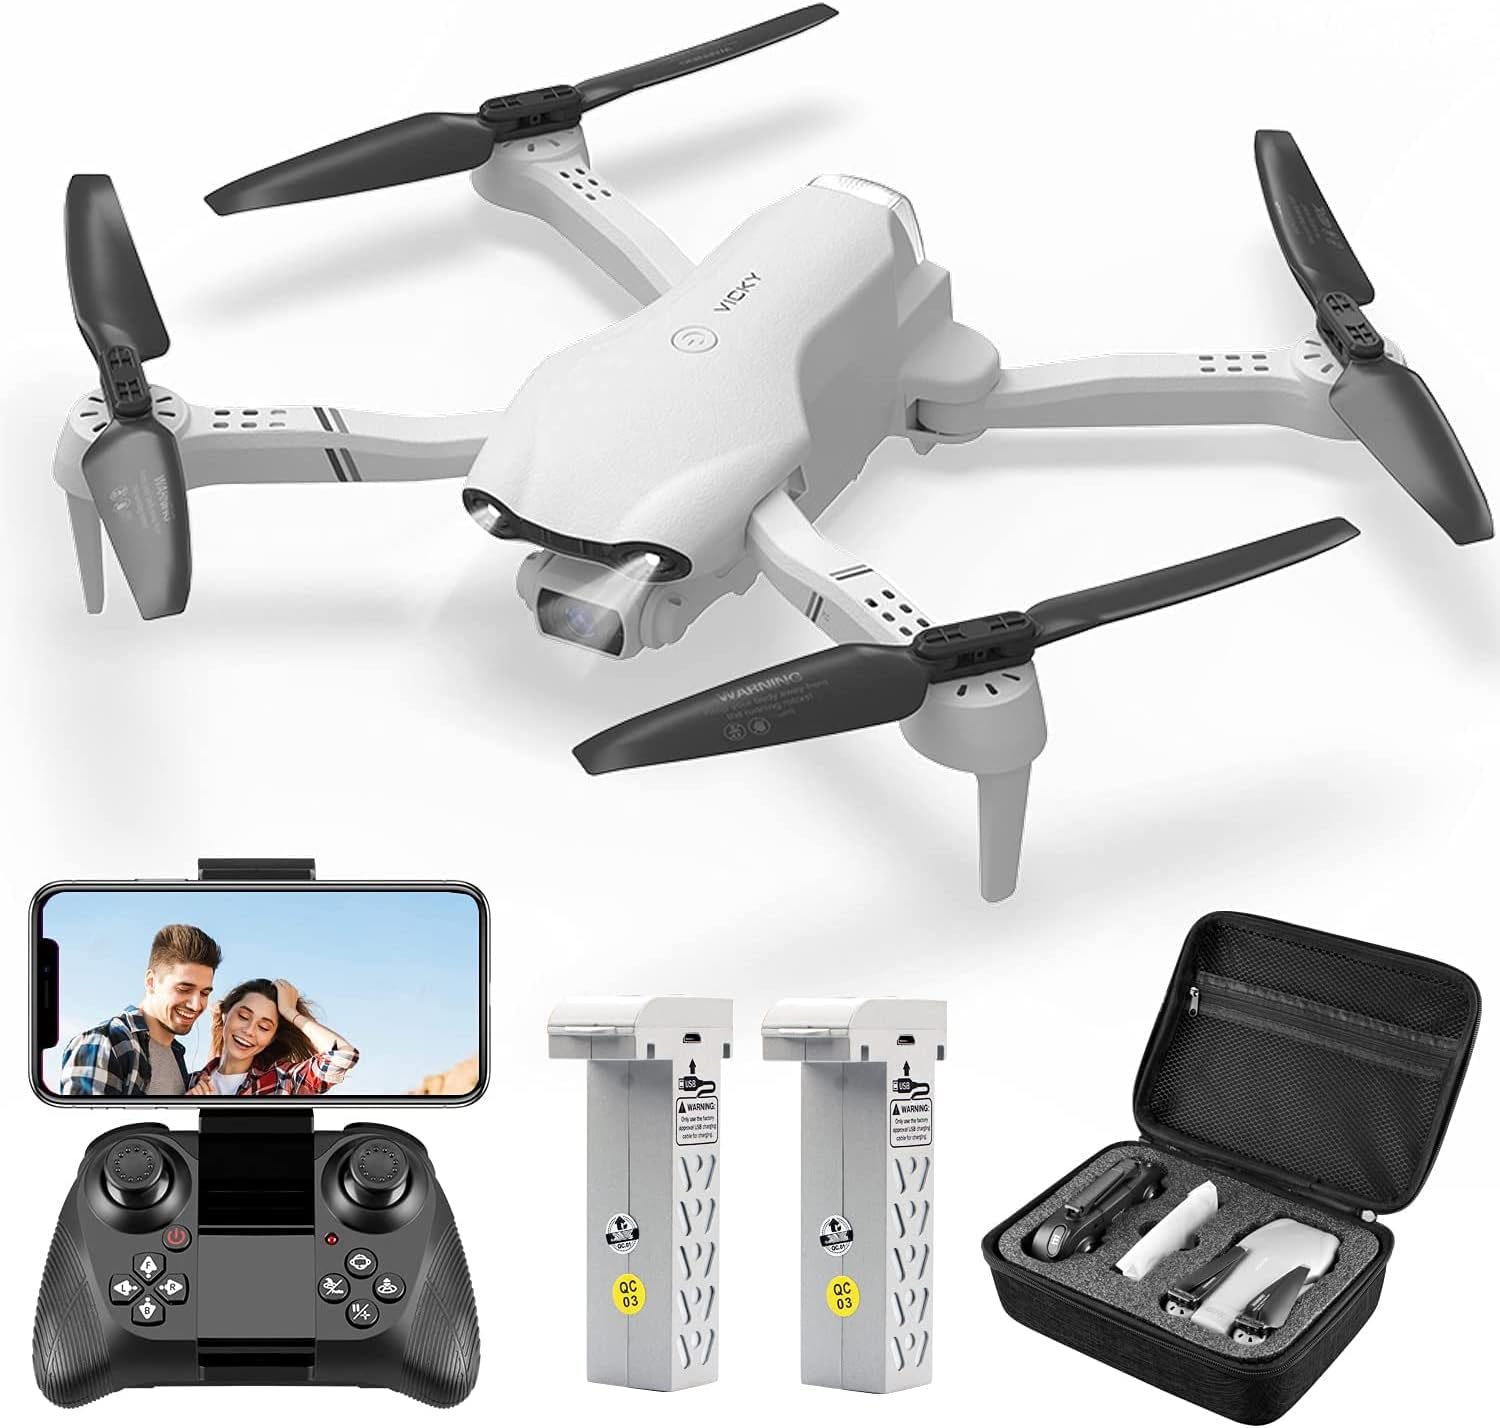 Droneeye 4DF10 Drone With HD 1080P Camera Now Available for a Whopping 44% off on Amazon